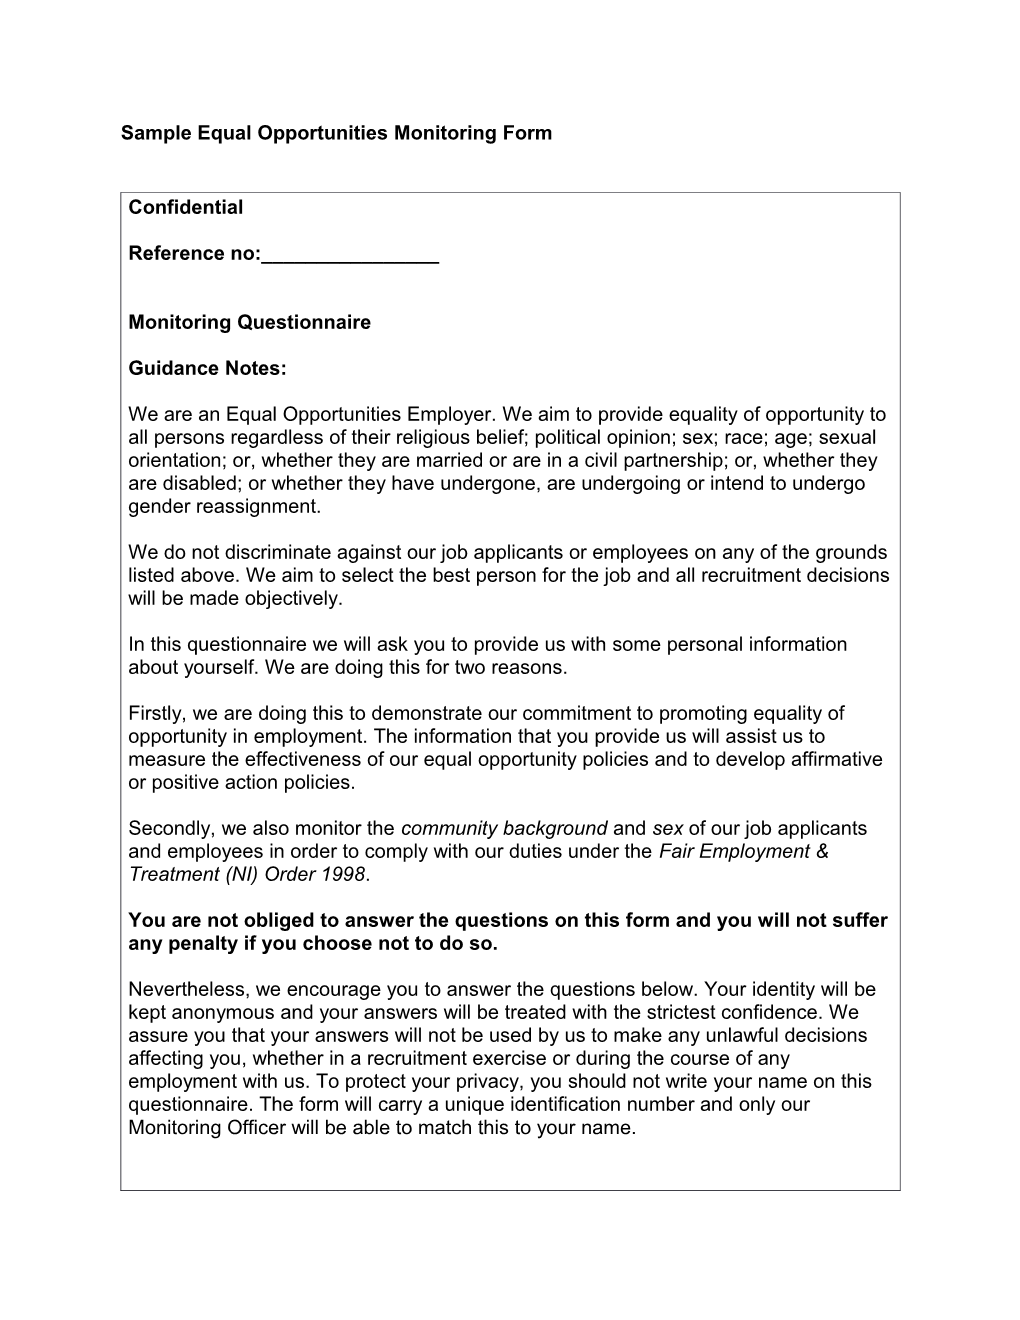 Sample Equal Opportunities Monitoring Form